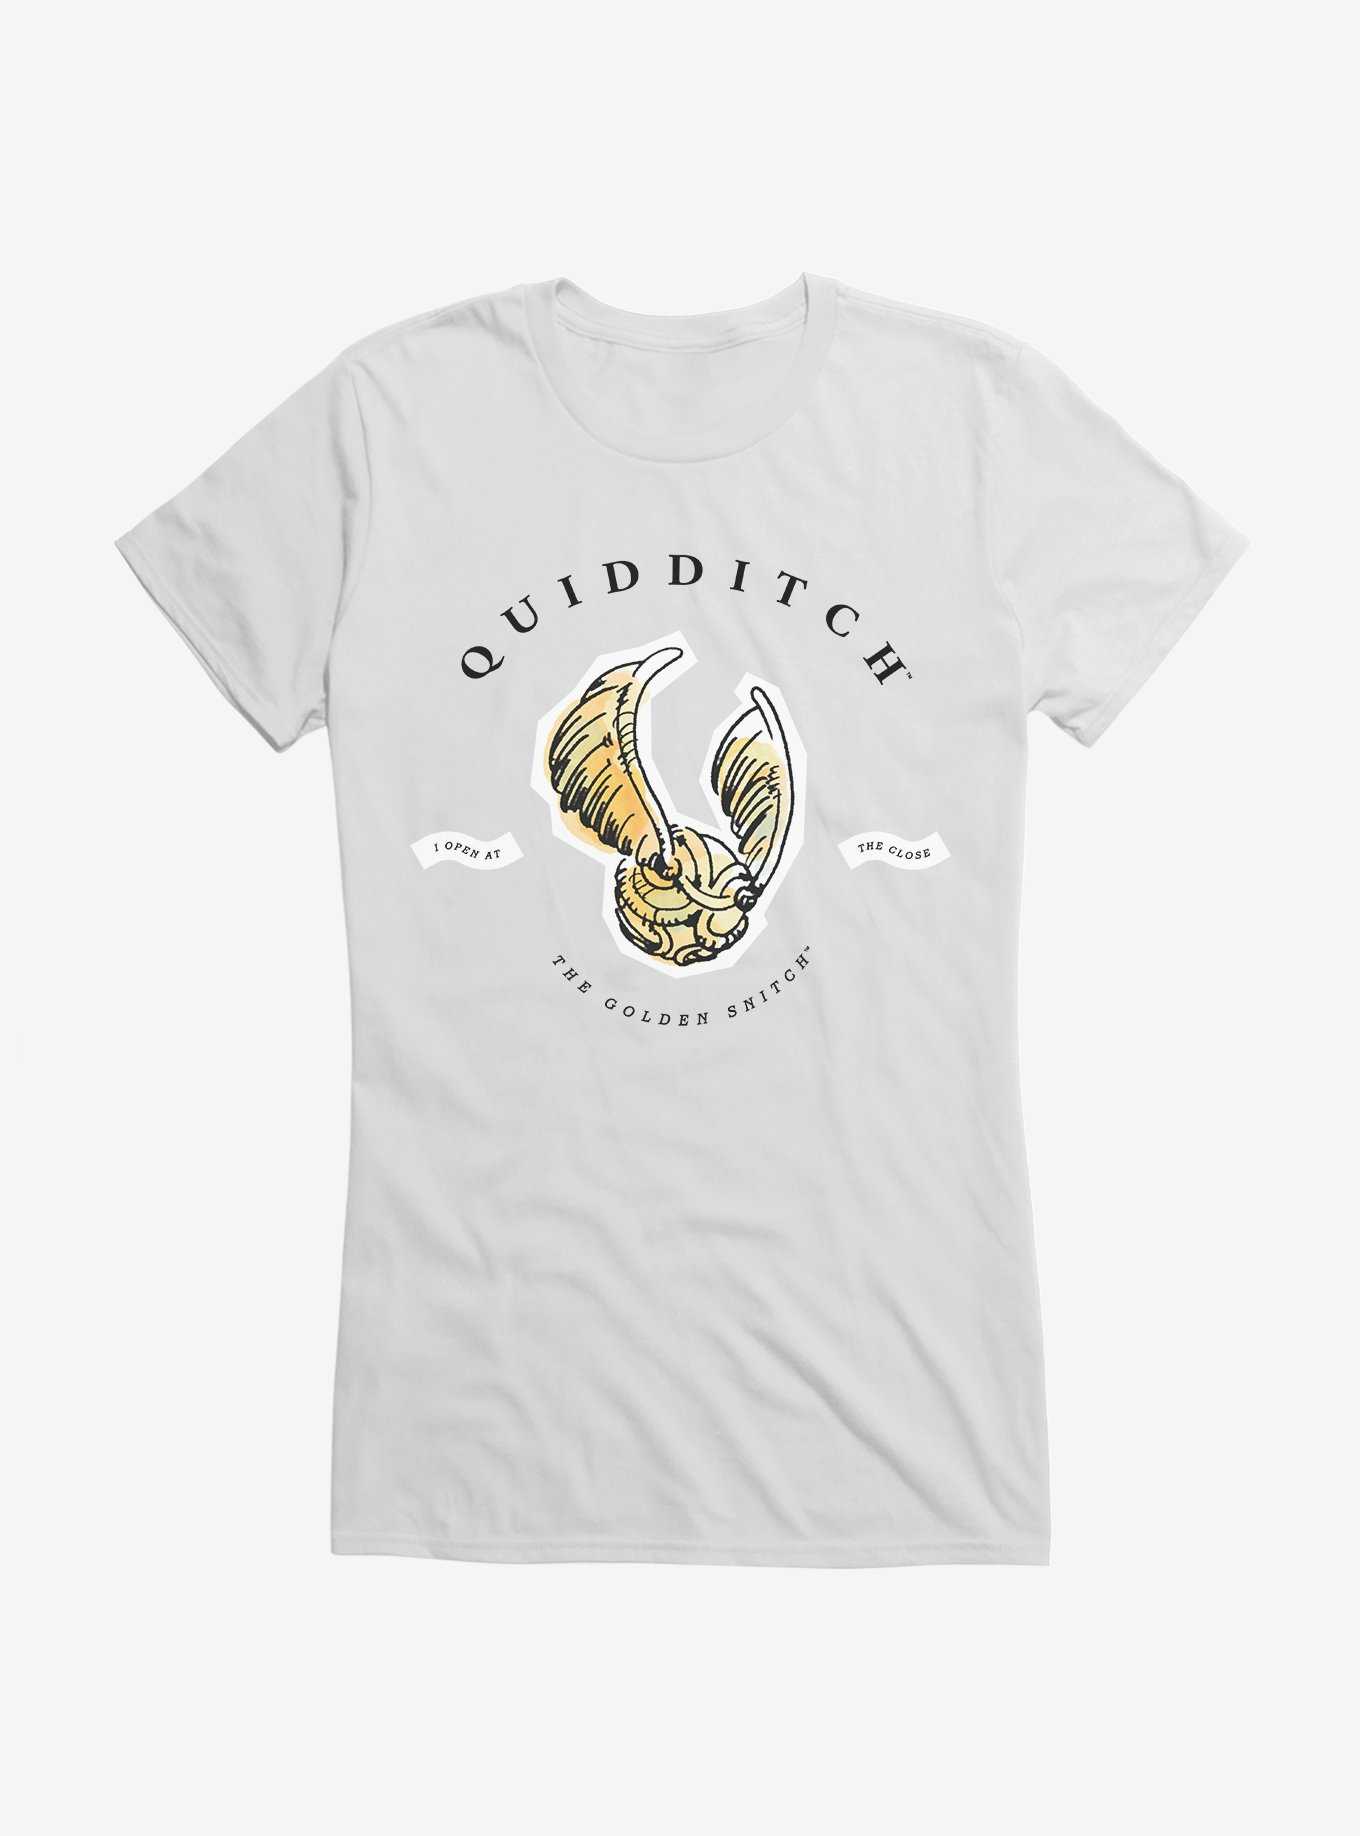 OFFICIAL Harry Potter Golden Snitch Shirts | Hot Topic Merch 